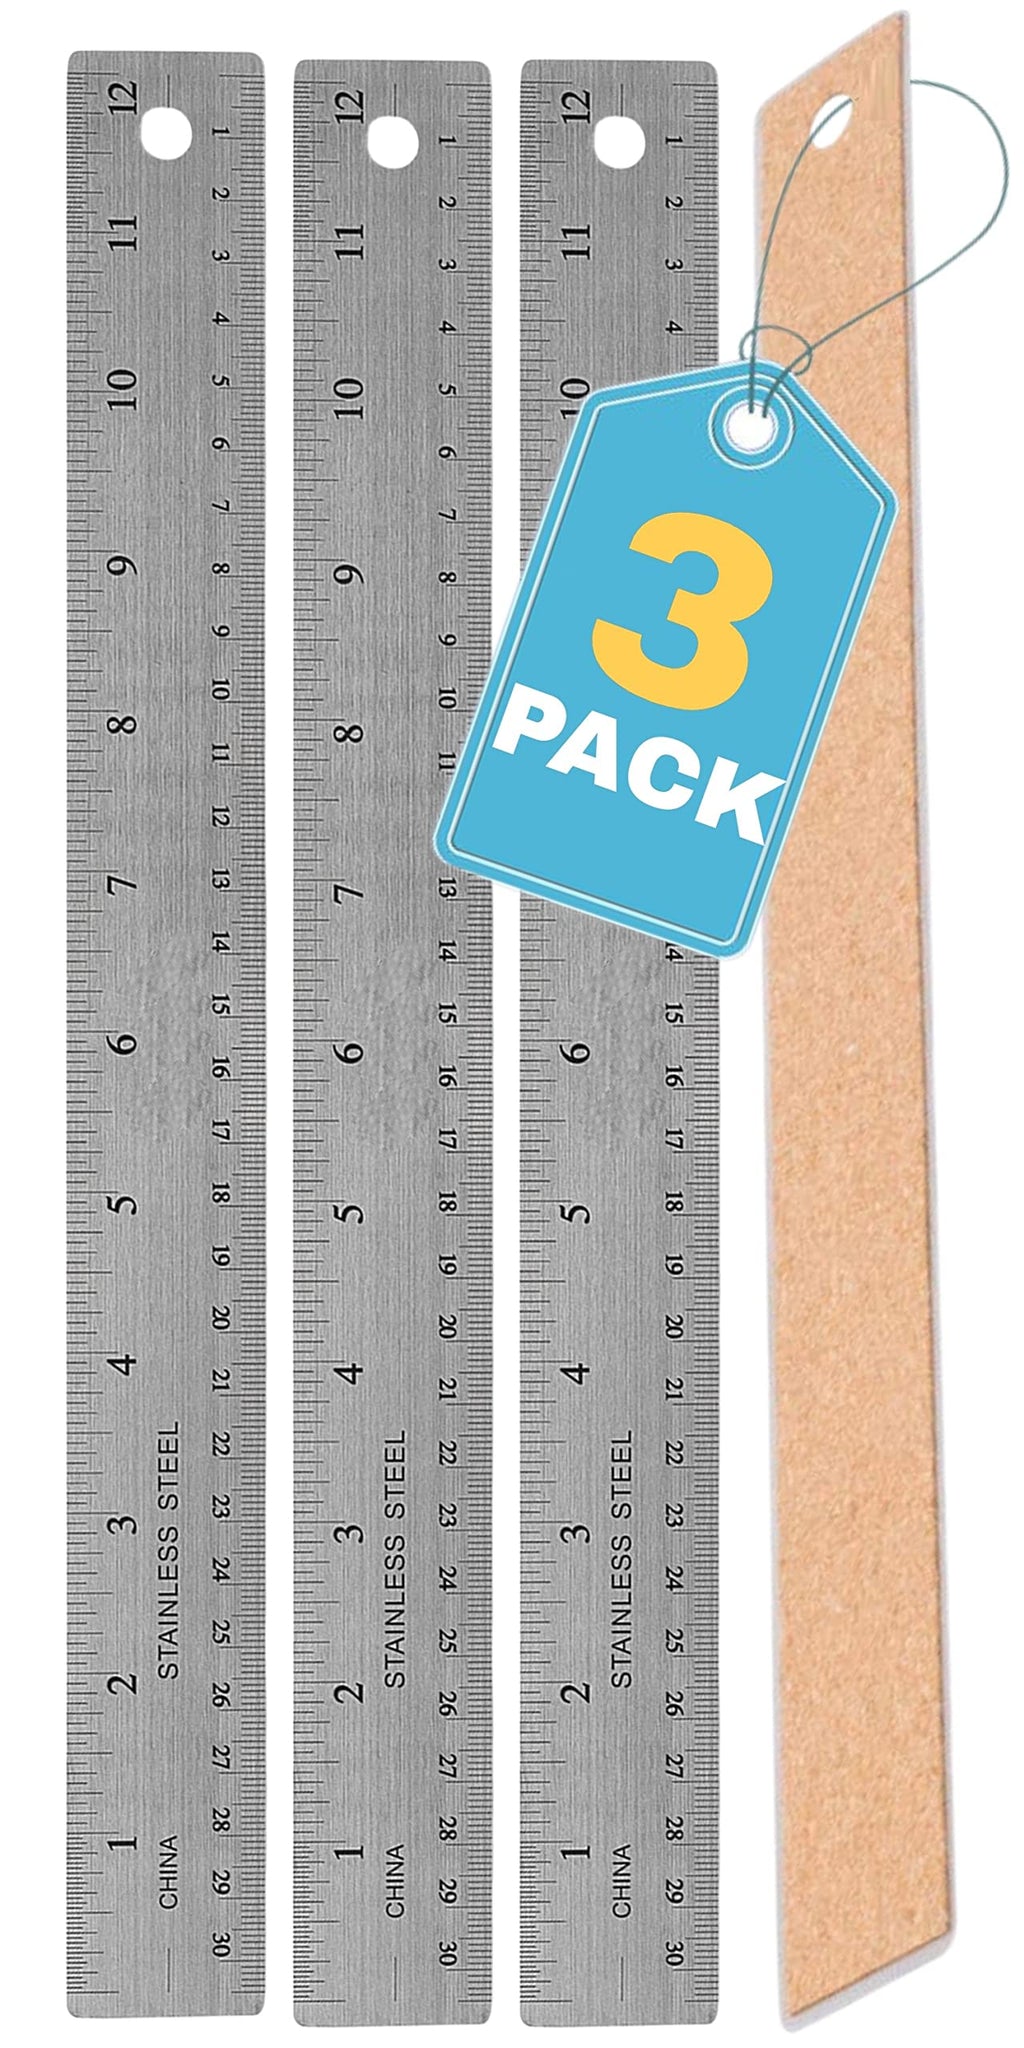  [AUSTRALIA] - 1InTheOffice Metal Ruler 12 Inch, Stainless Steel 12 Inch Ruler with Cork Back and Hanging Hole - 1/16" Standard Scale Metal Ruler 12 inch - 3 Pack